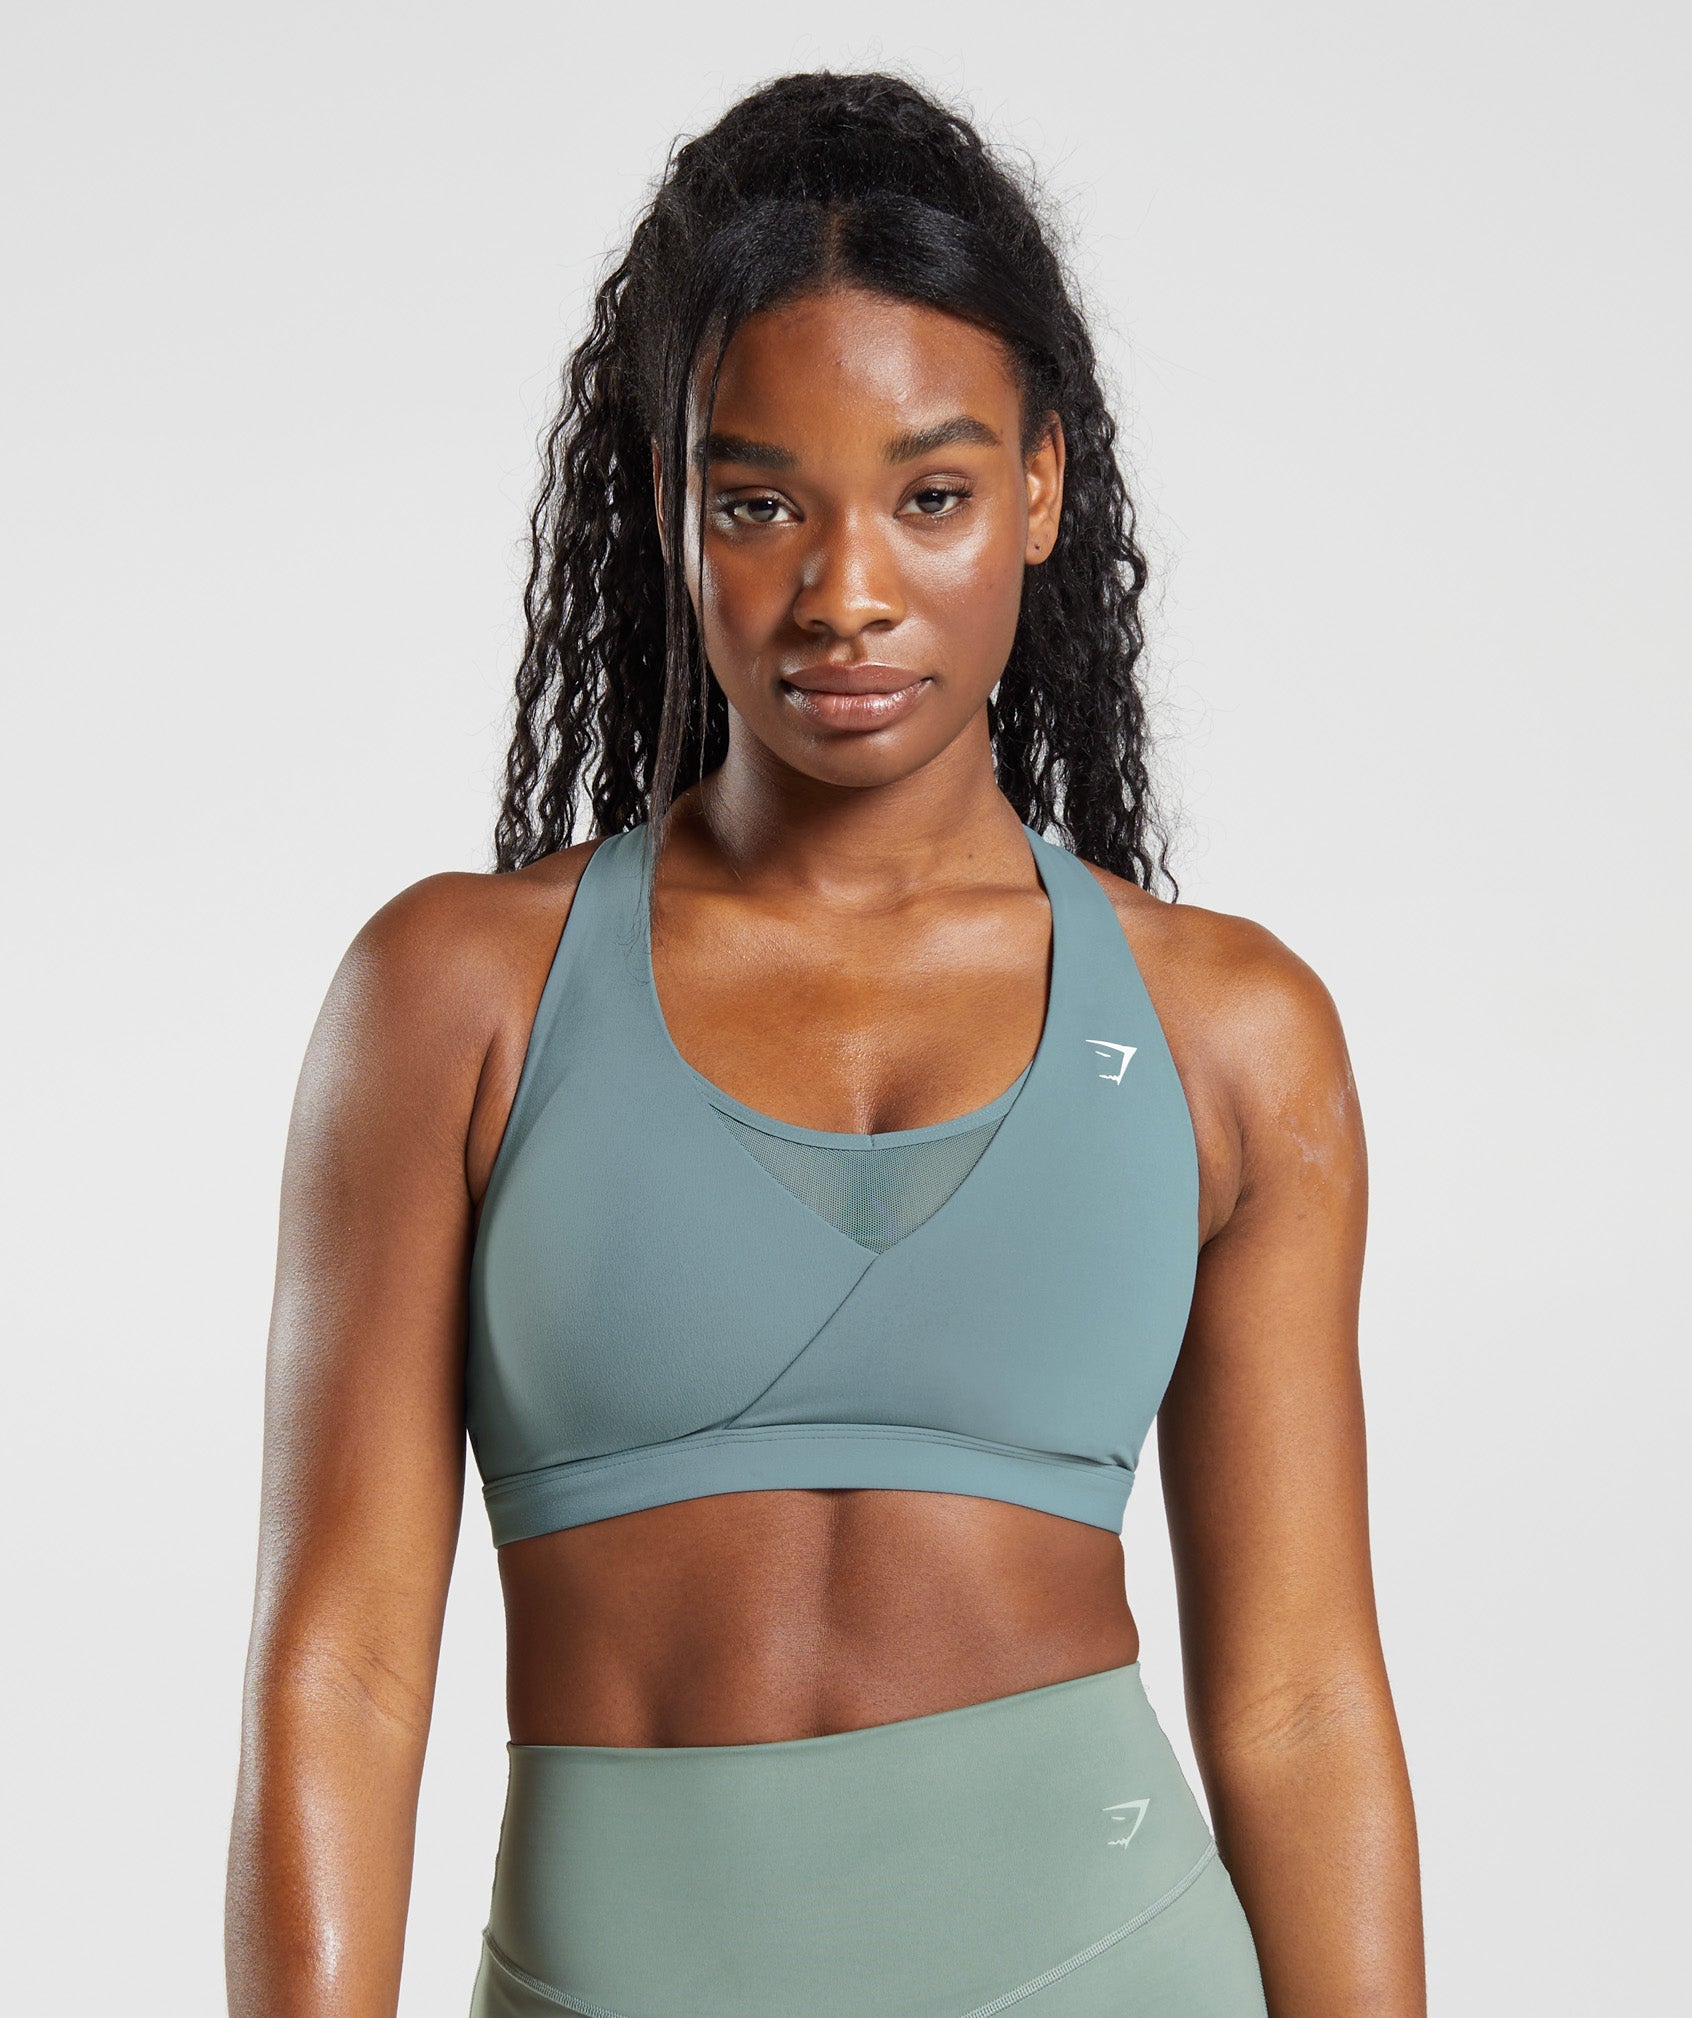 Sunflower Tank Top - Low Support Crossover Y-Back Sports Bra